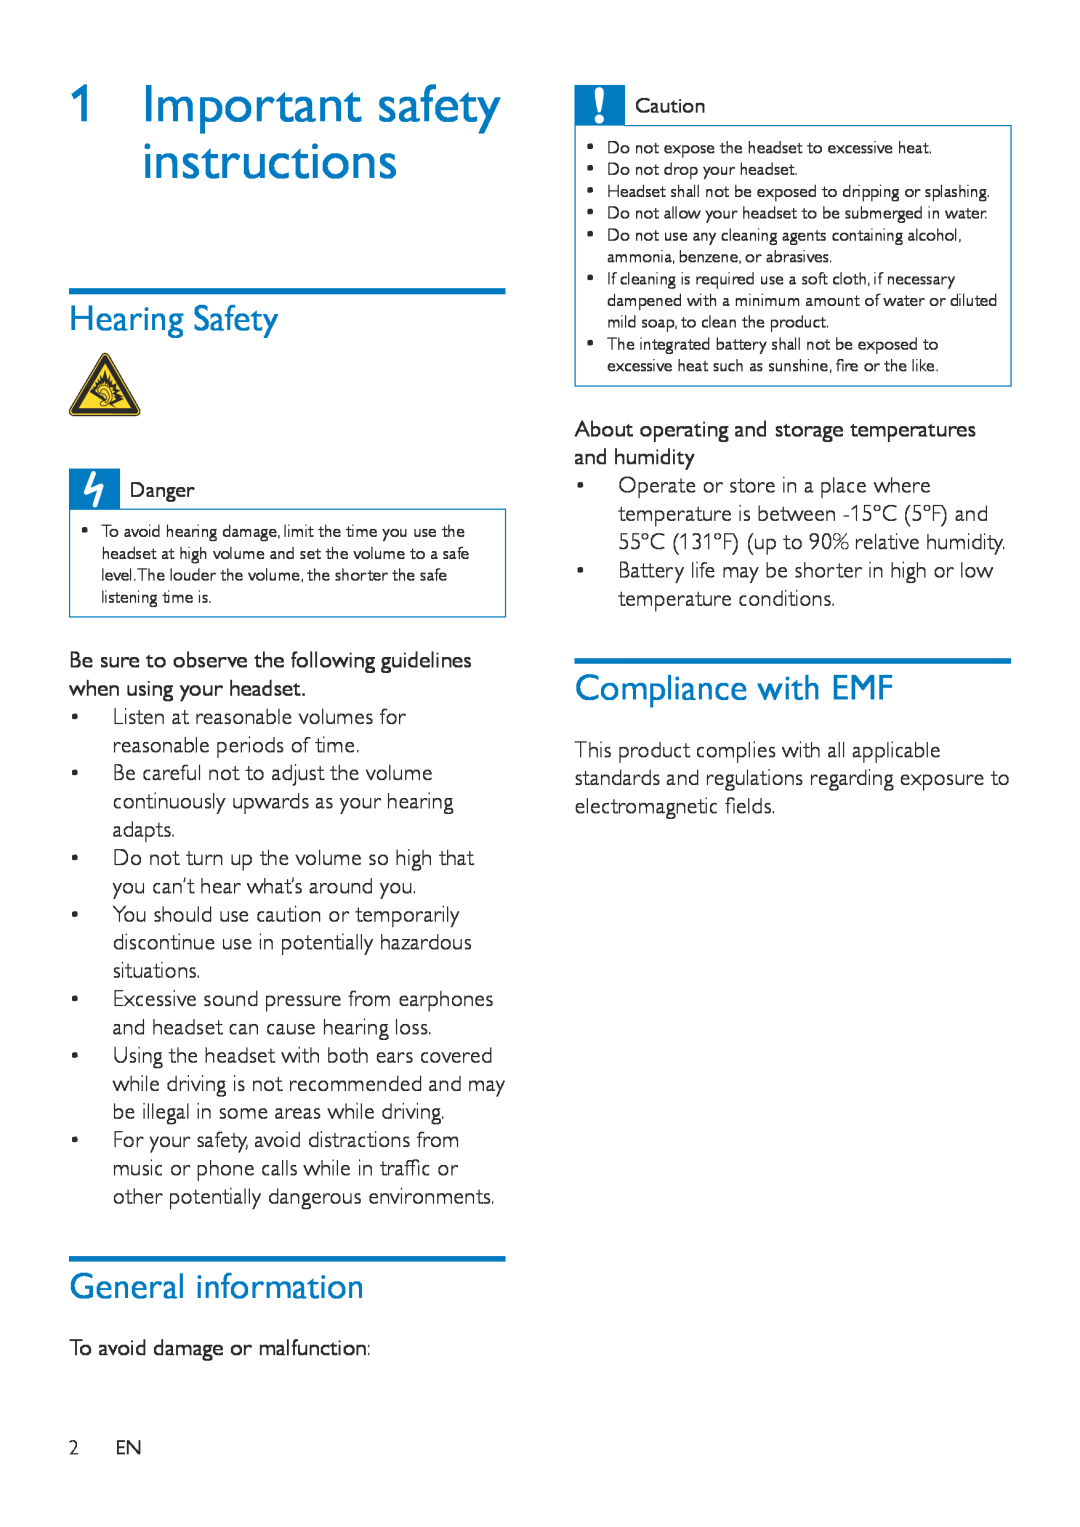 Philips SHB9150 user manual 1Important safety instructions, Hearing Safety, General information, Compliance with EMF 